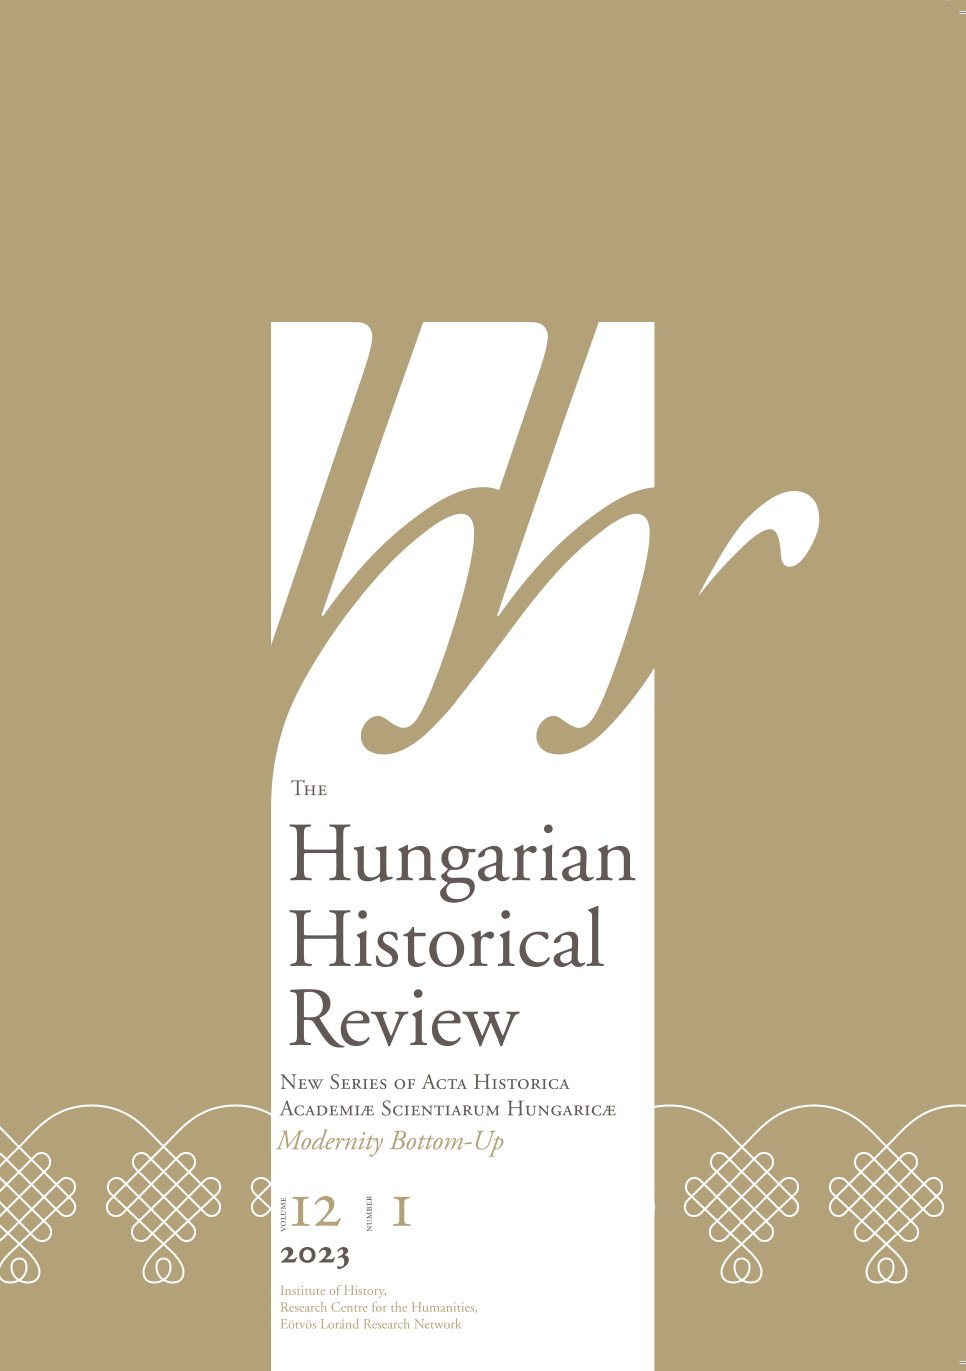 Rural Reactions to Modernization: Anti-Modernist Features of the 1883 Anti-Hungarian Peasant Uprising in Croatia